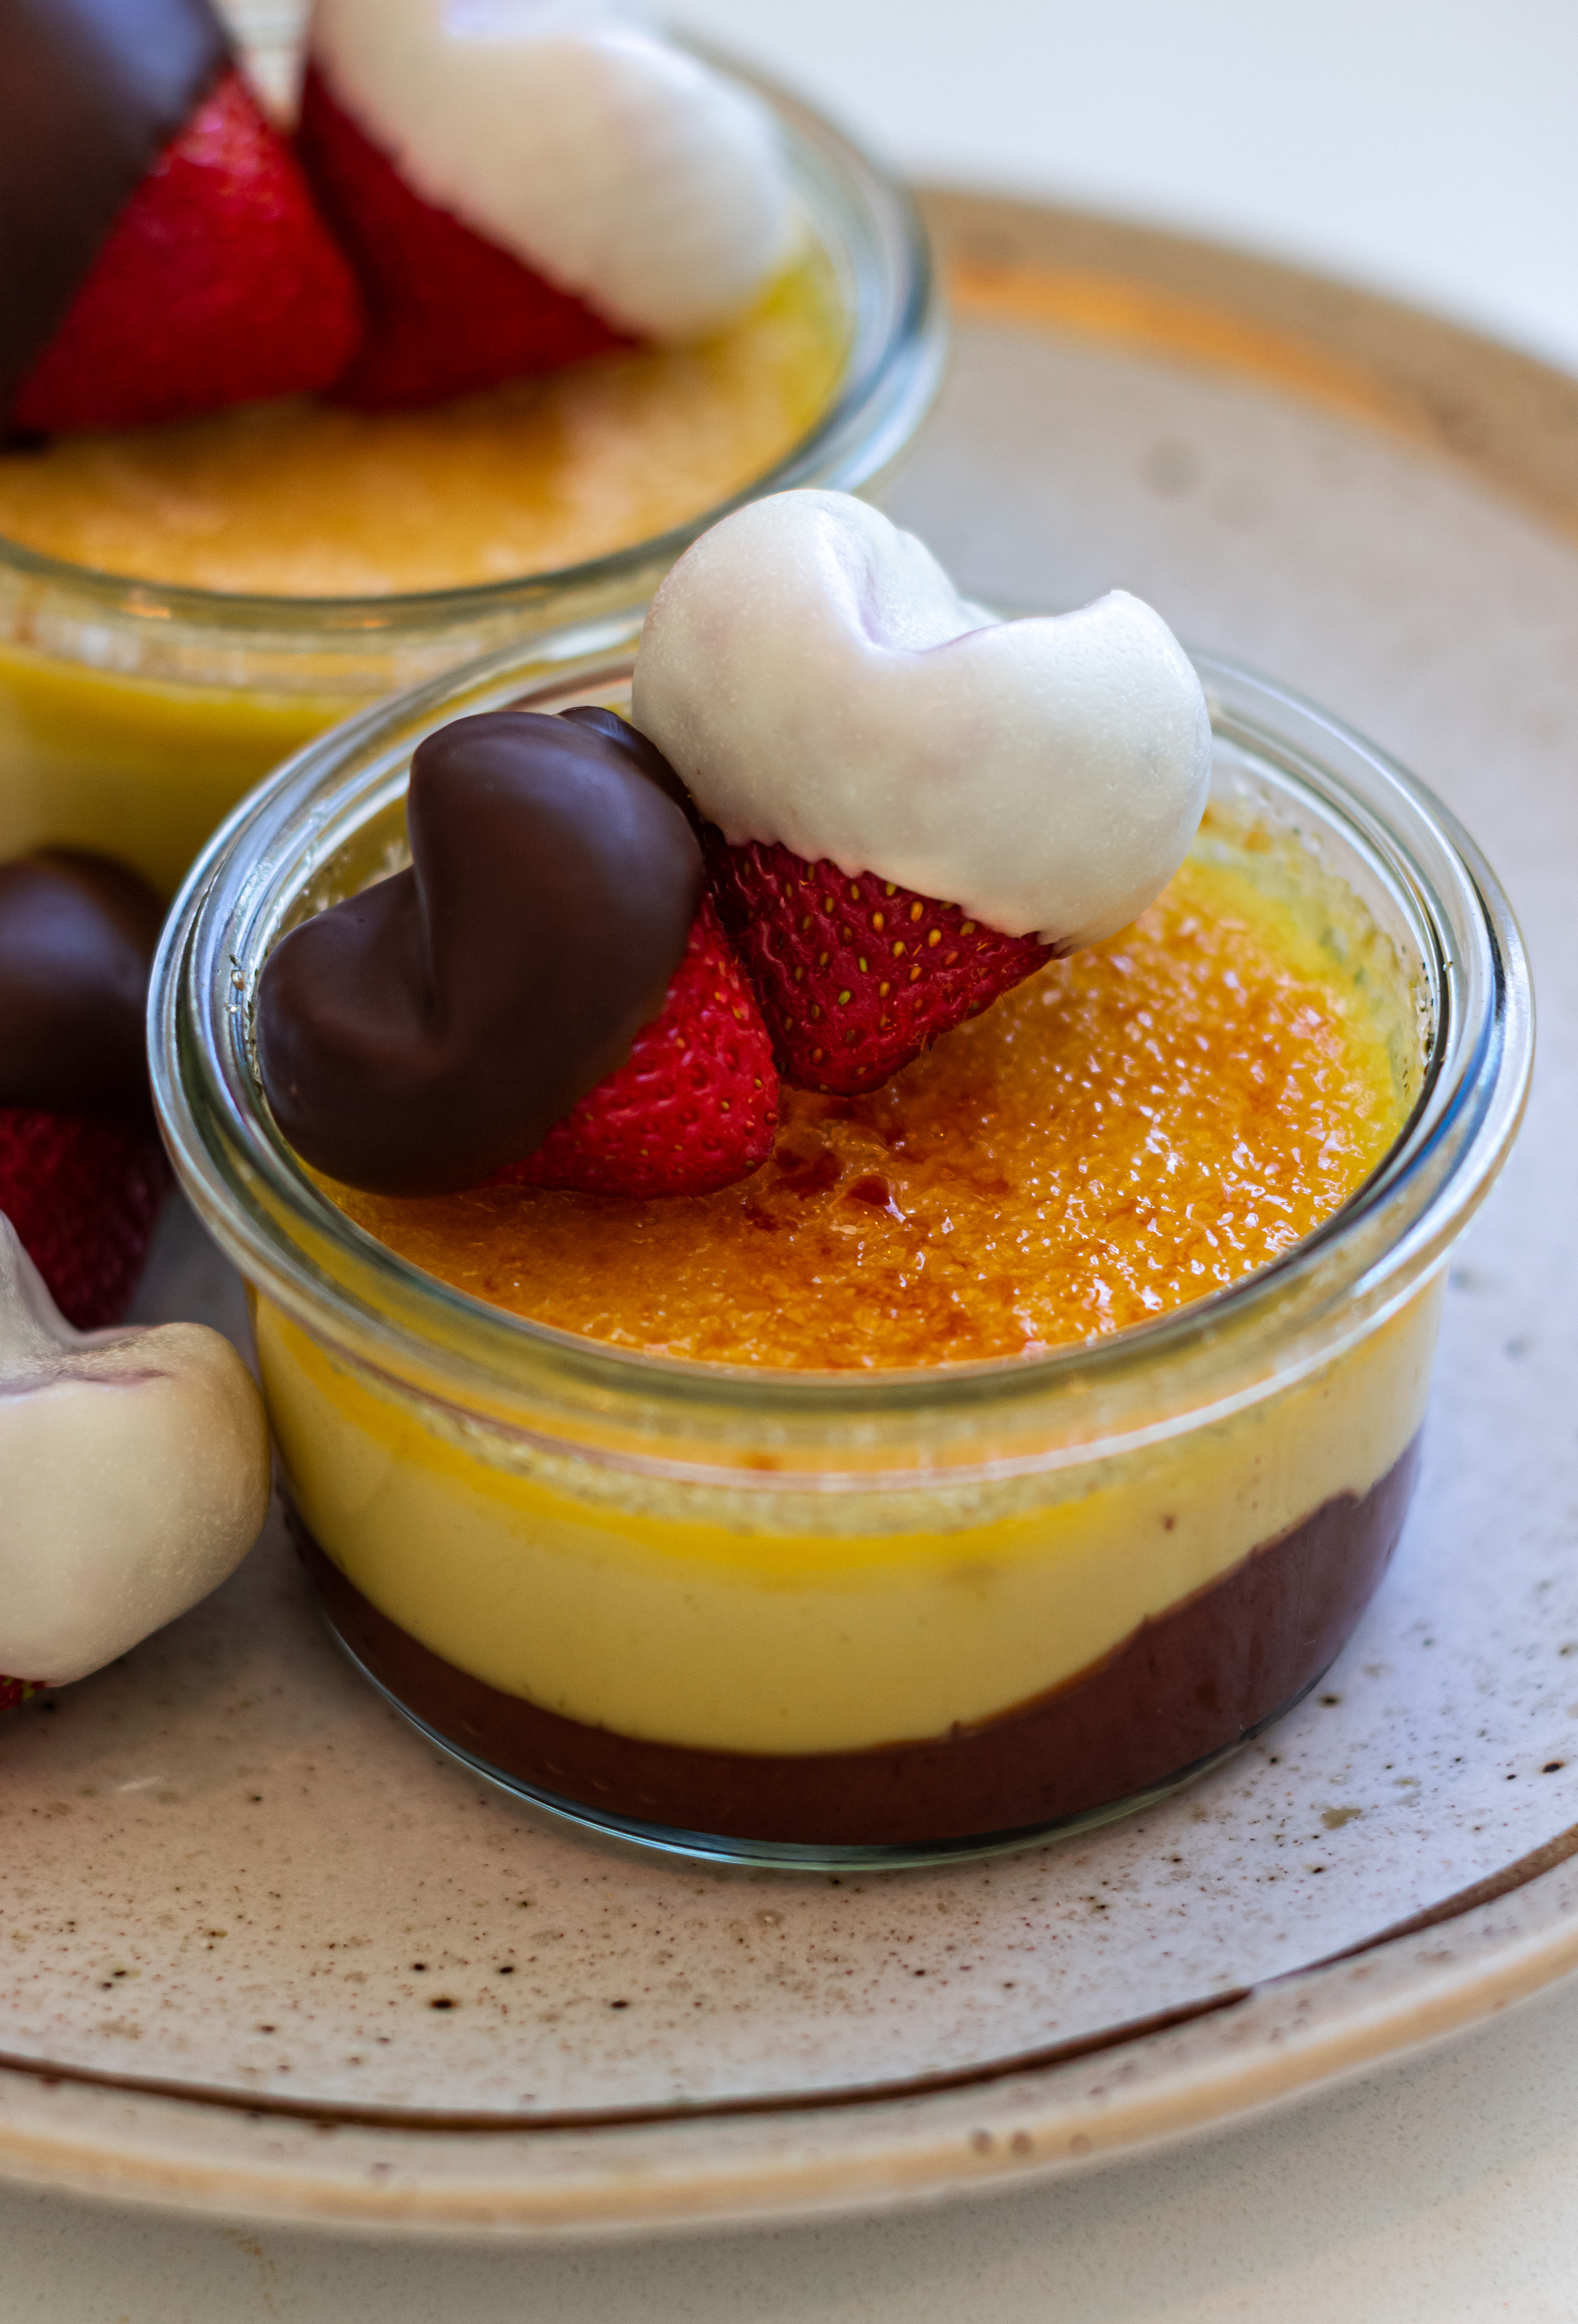 Sous Vide Spiked Tuxedo Creme Brulee